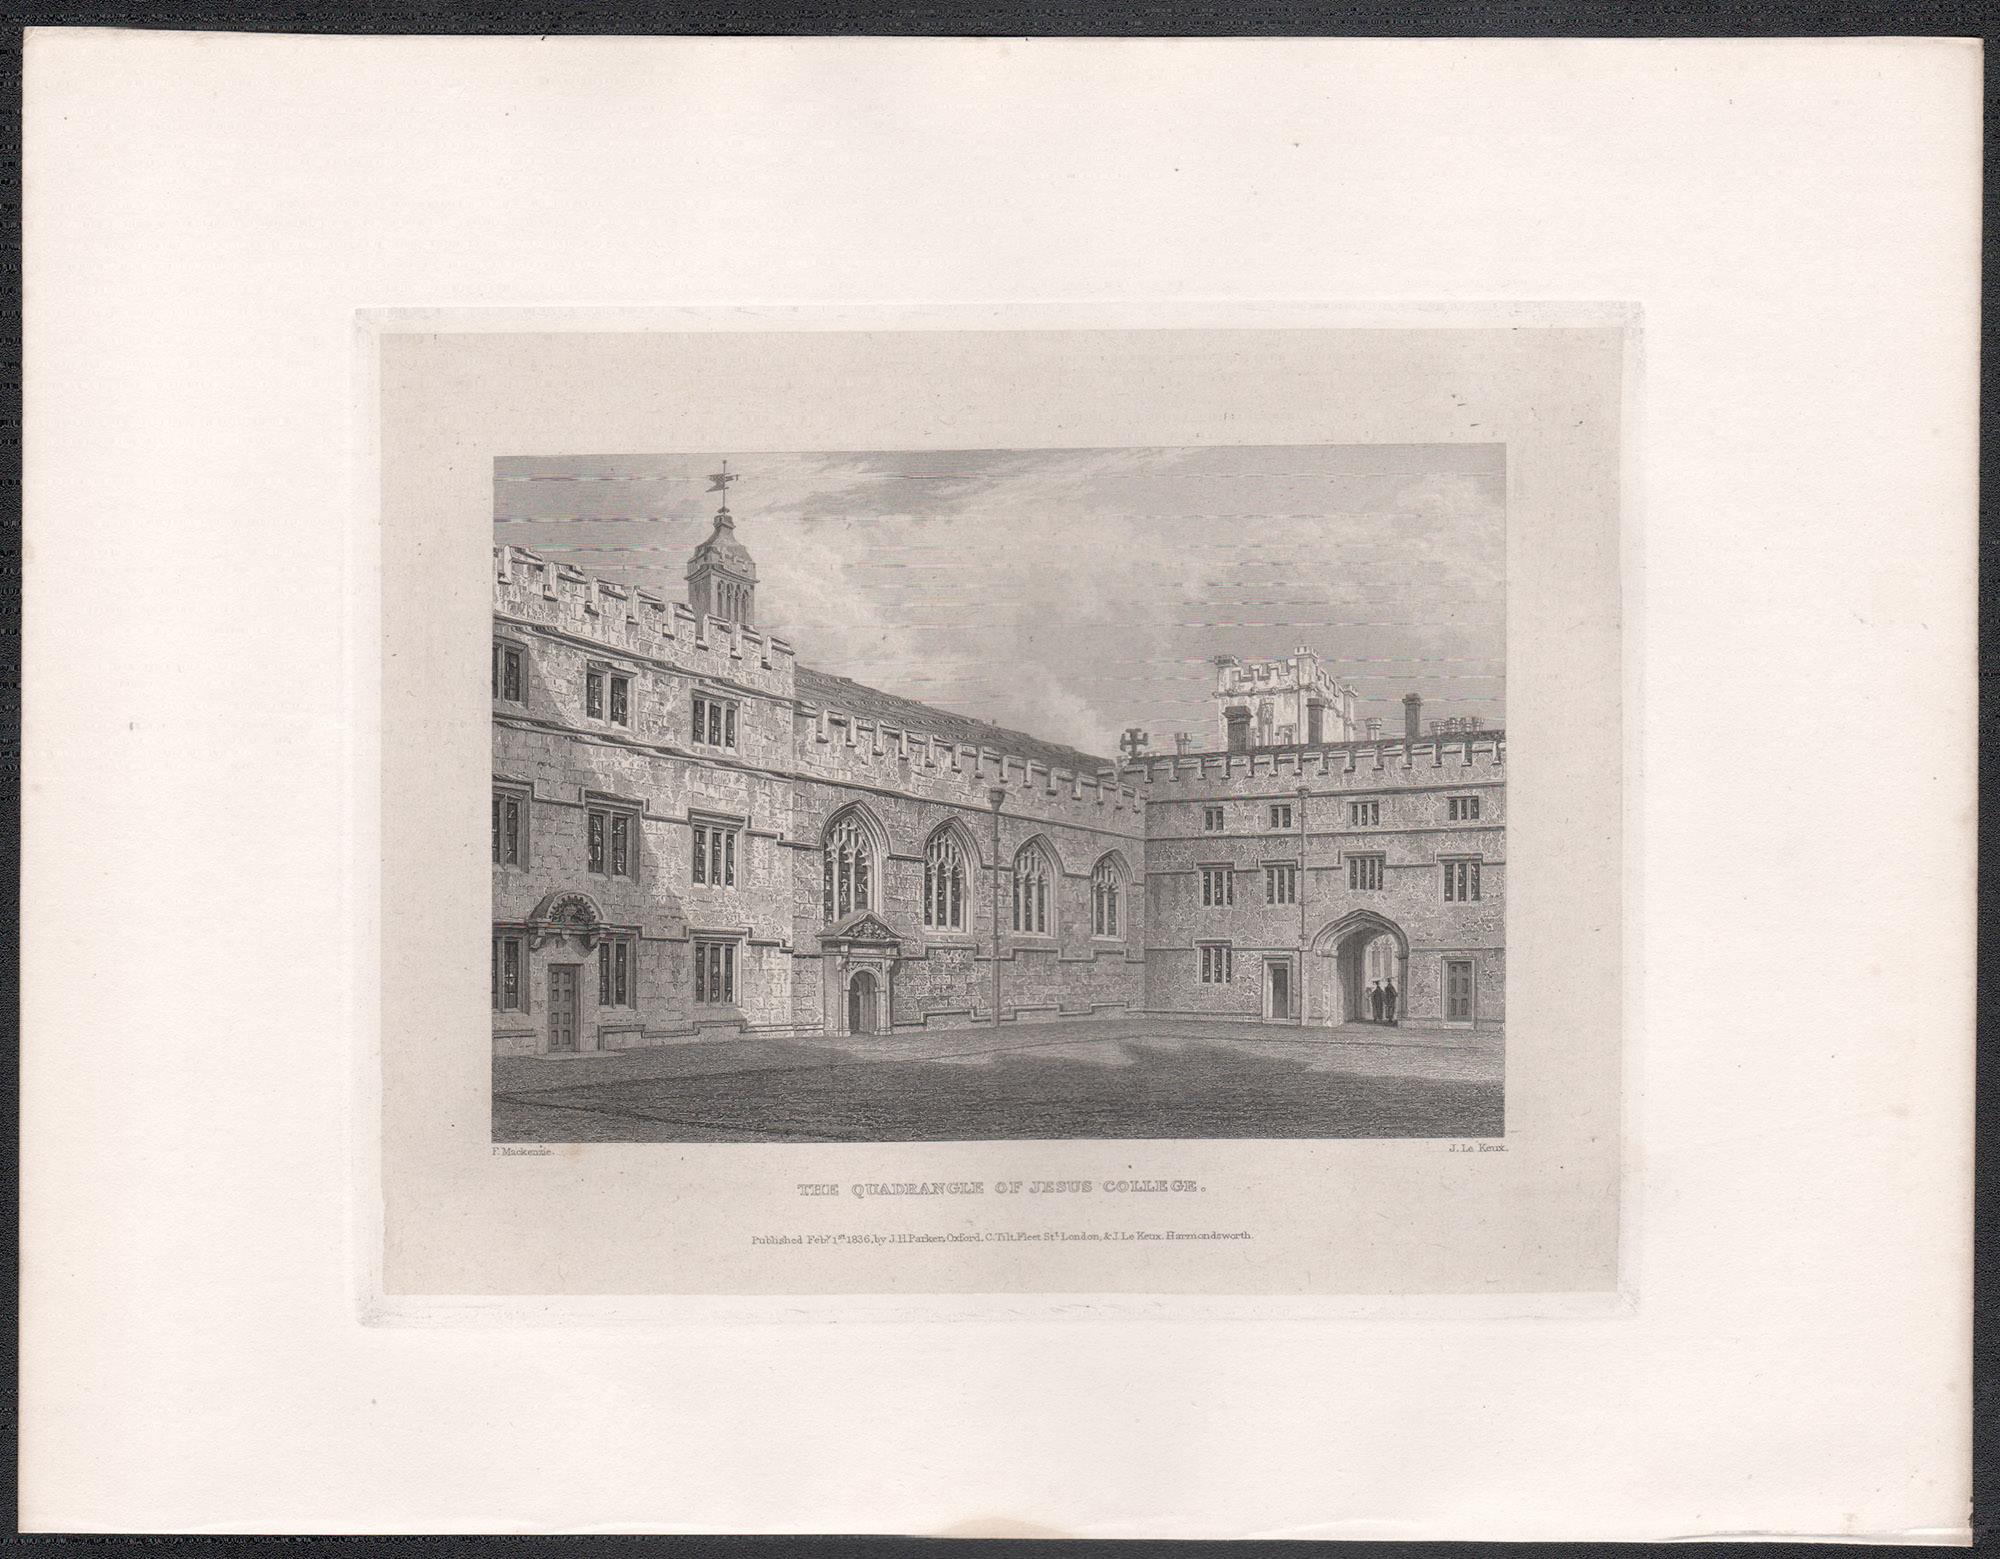 The Quadrangle of Jesus College. Oxford University. Antique C19th engraving - Print by John Le Keux after Frederick Mackenzie